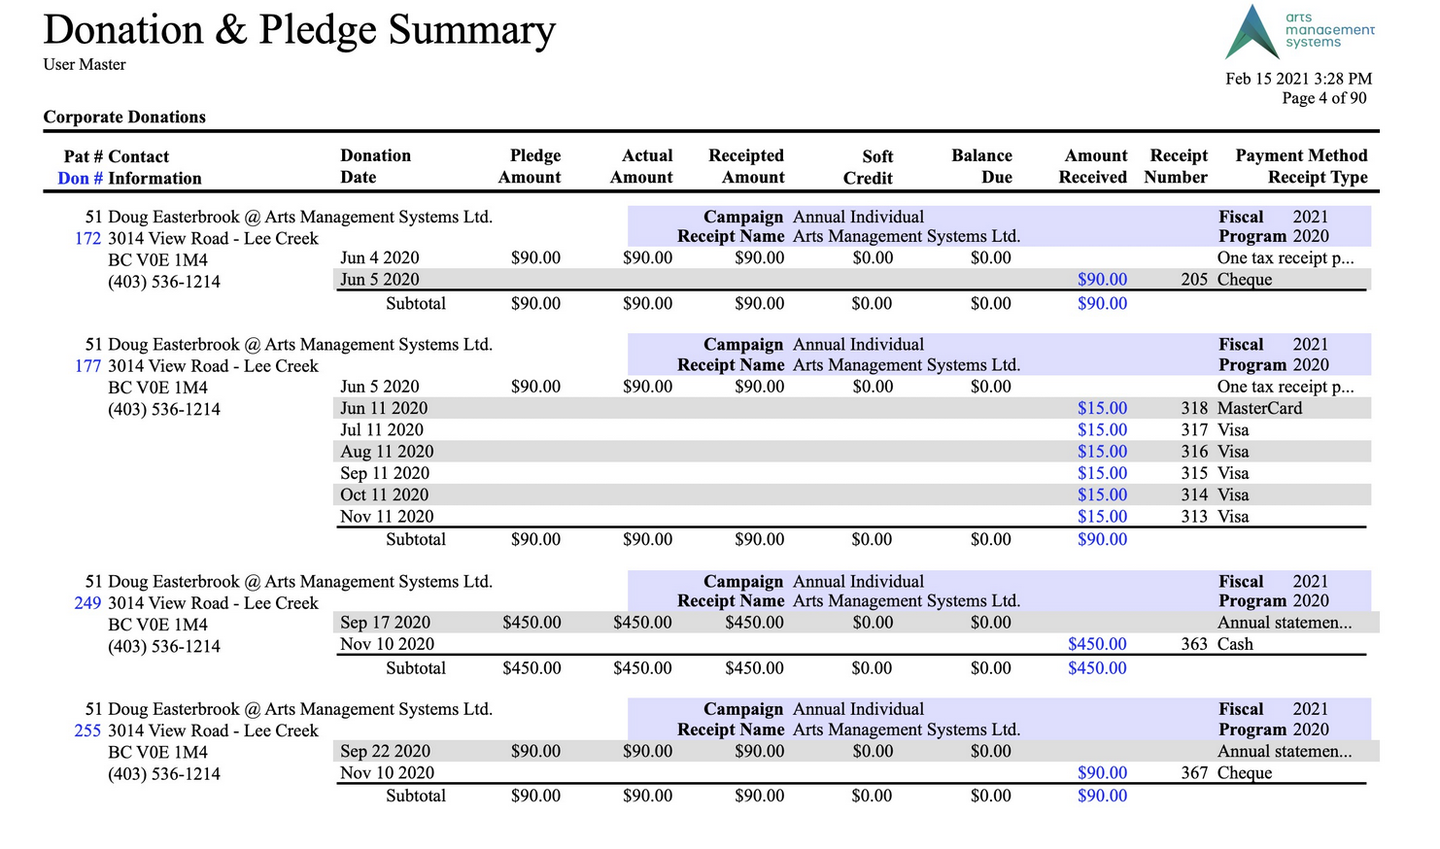 Donor & Pledge Summary with Payments